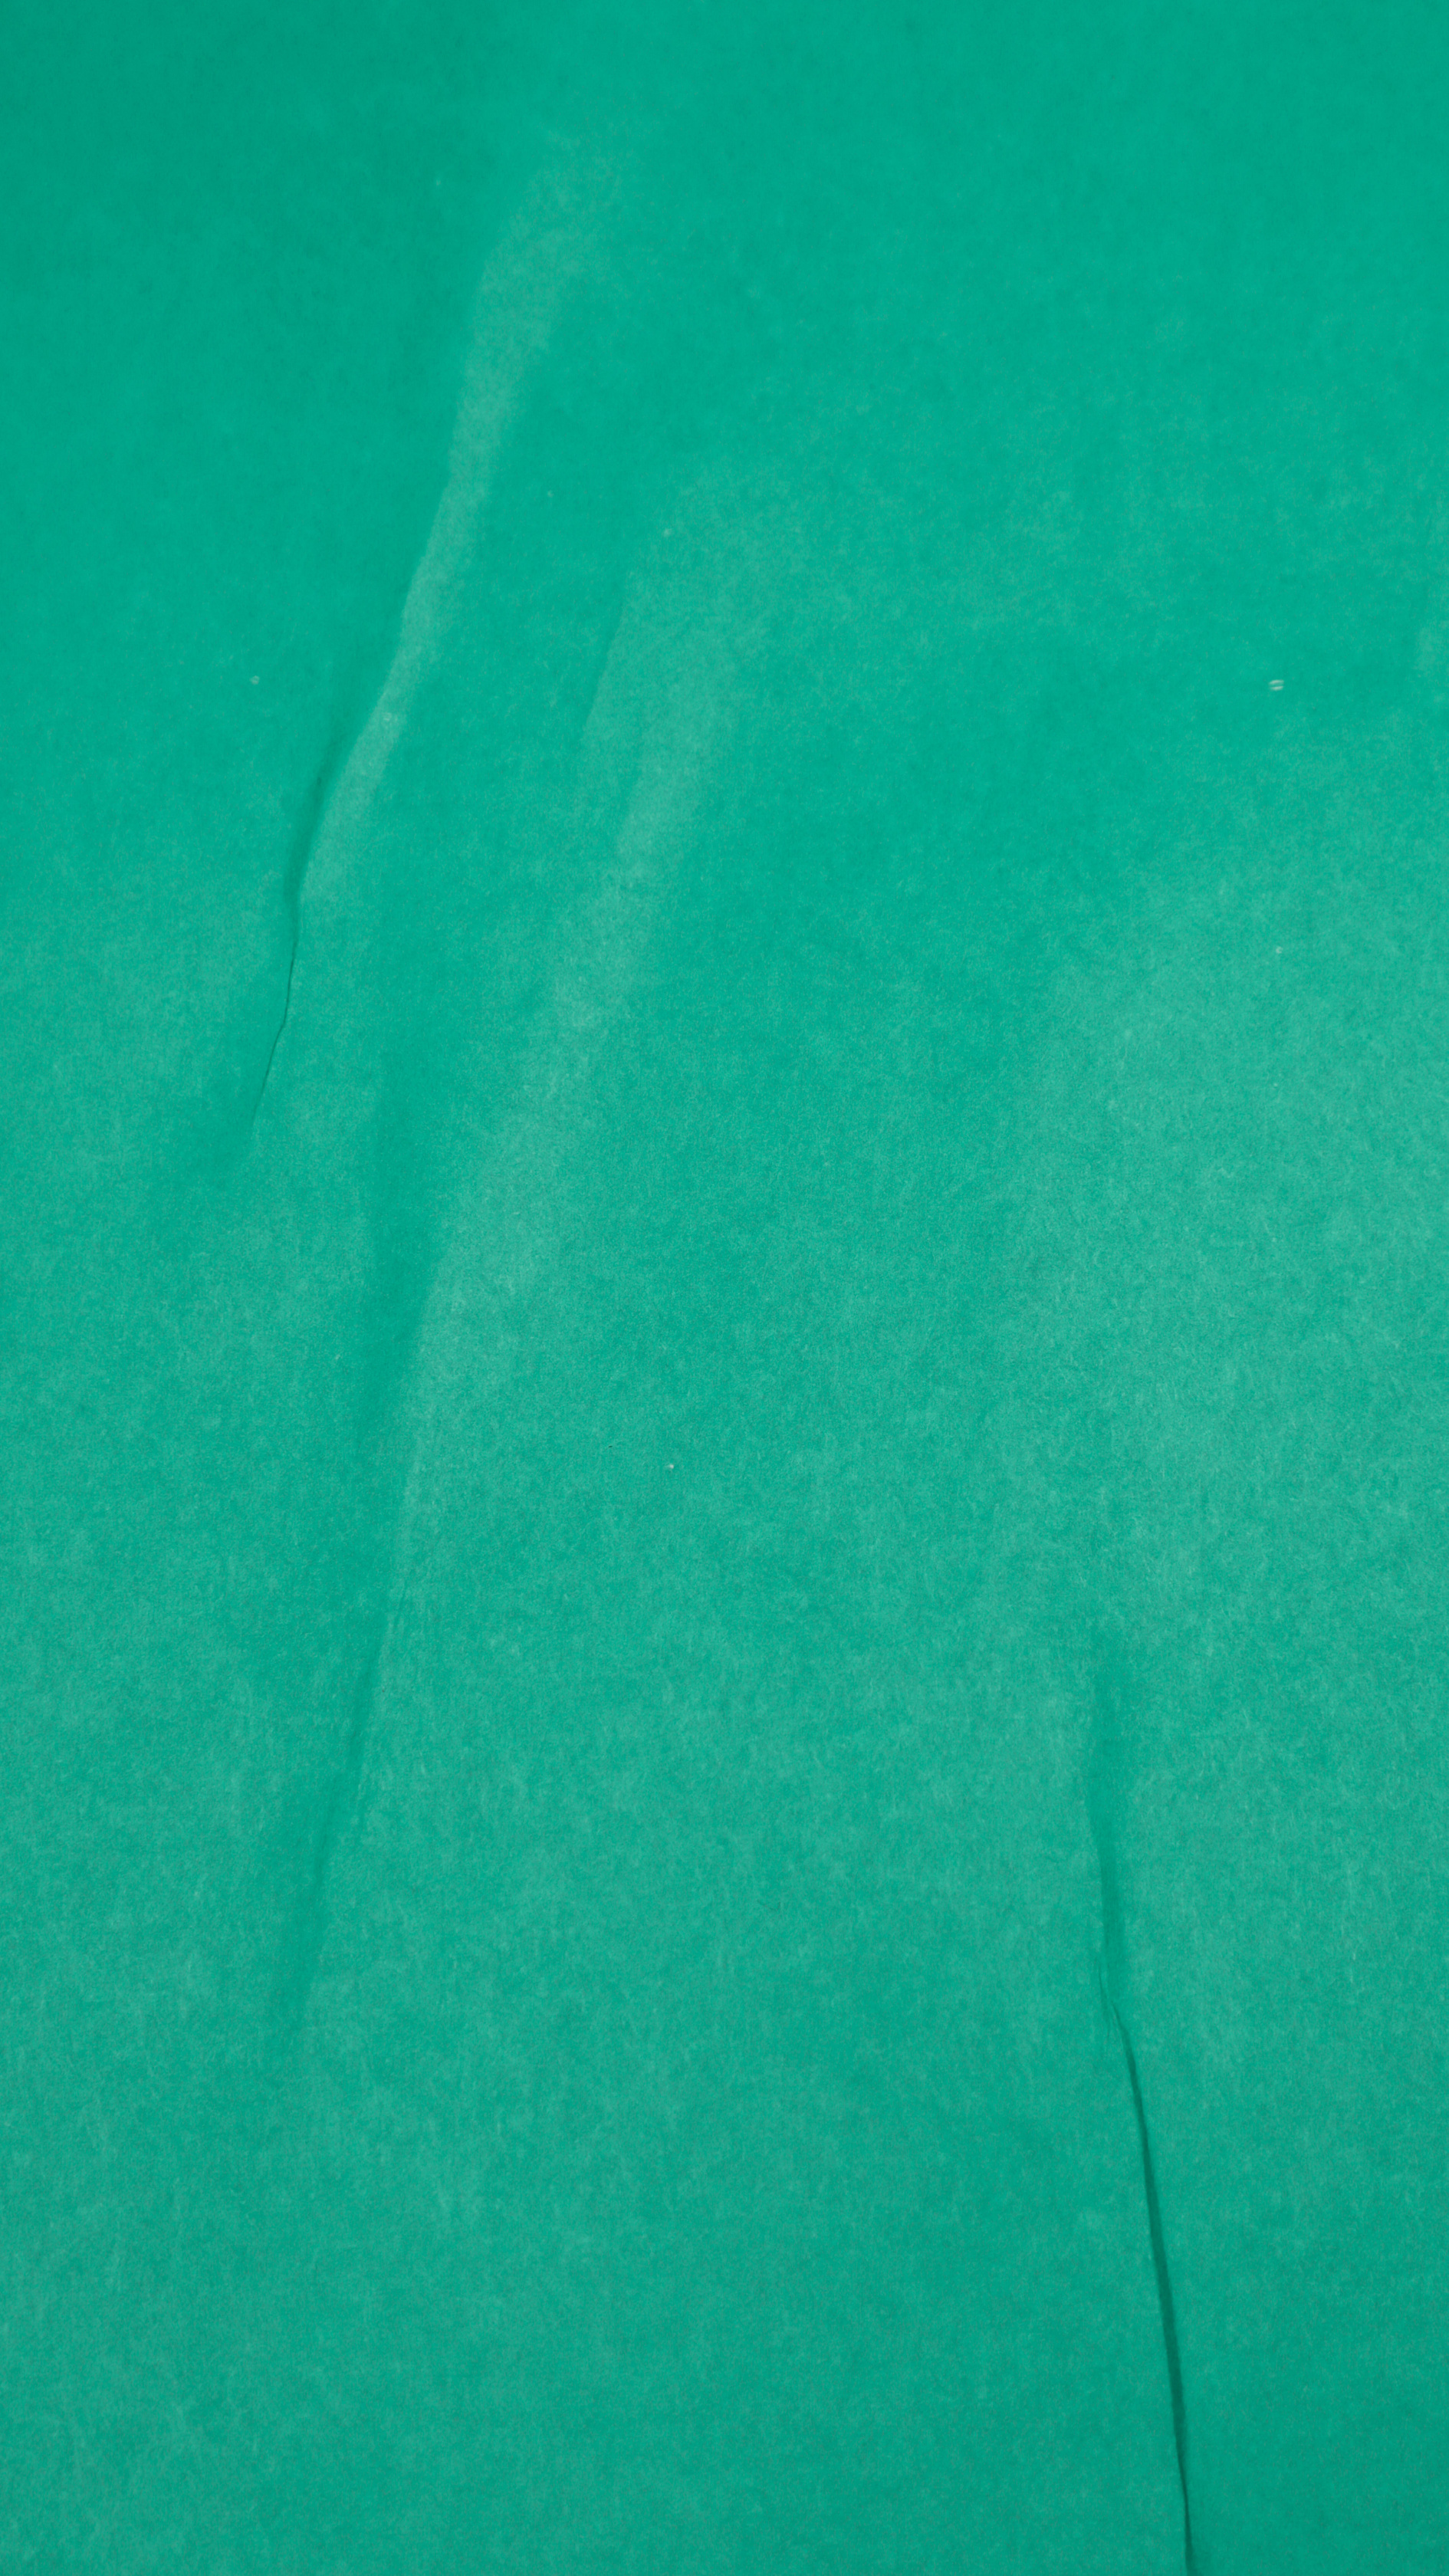 Teal Green Paper Texture